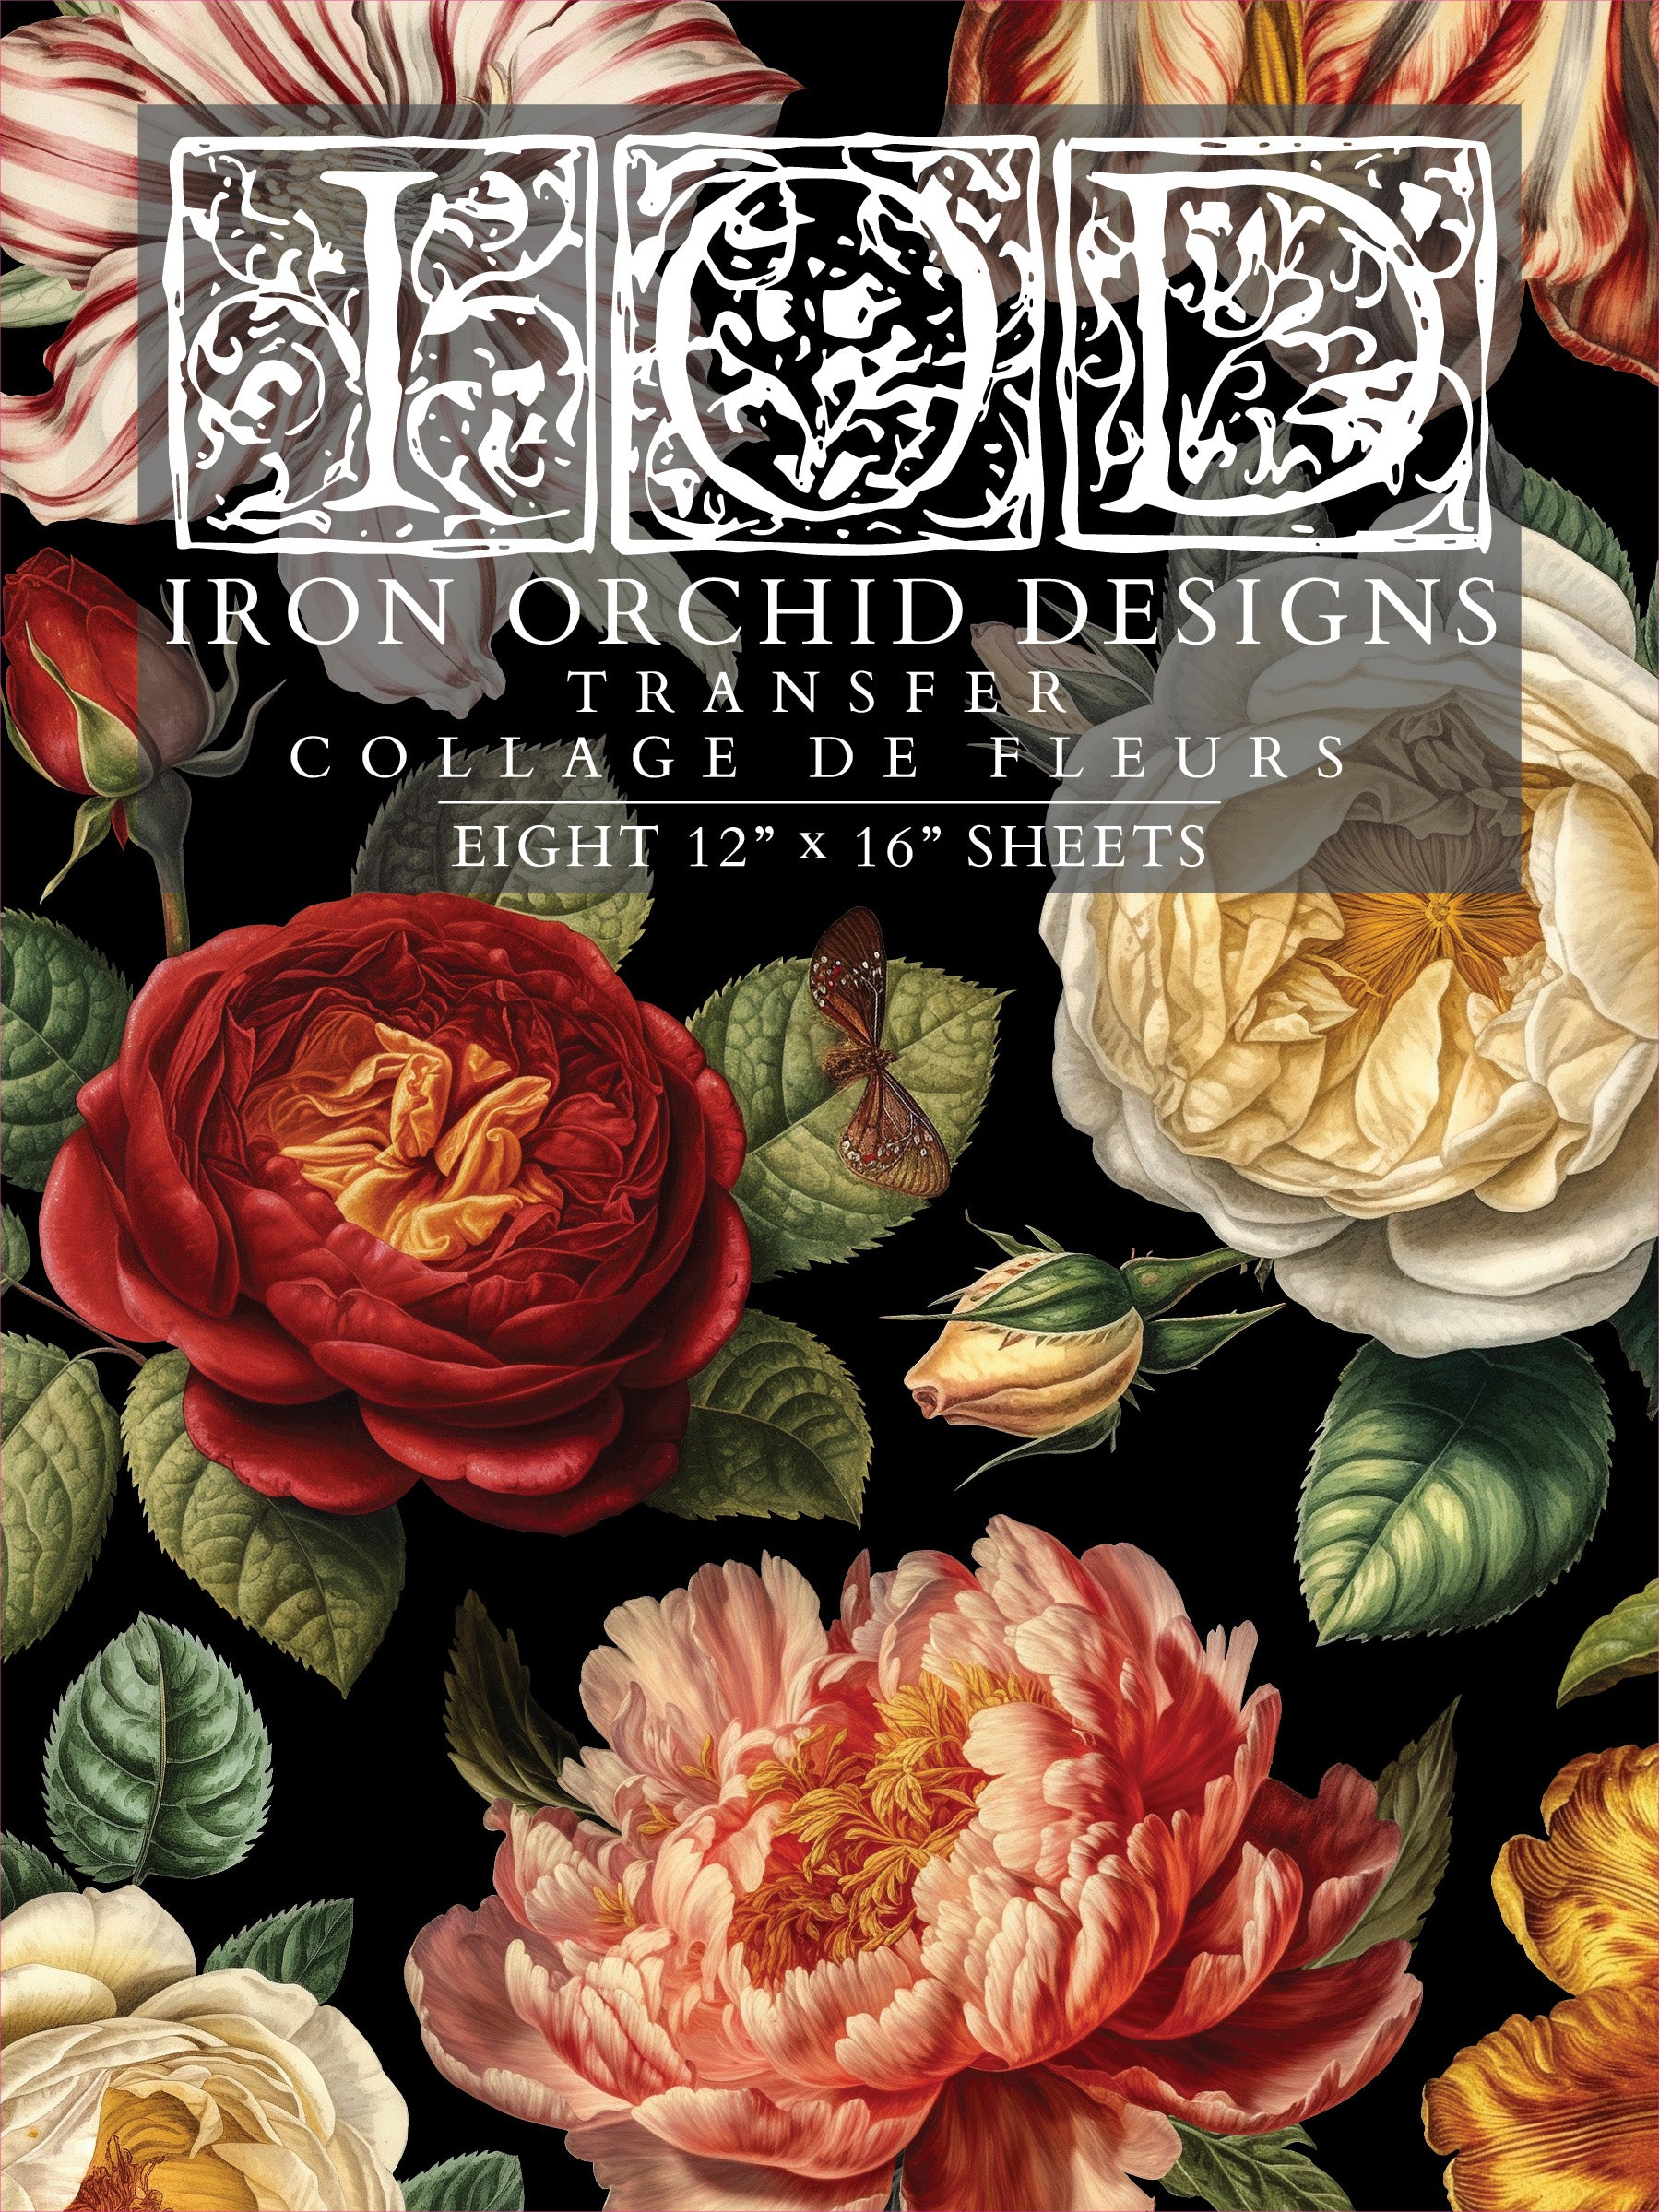 Joie des Roses IOD Transfer 12x16 Pad Iron Orchid Designs, LLC.